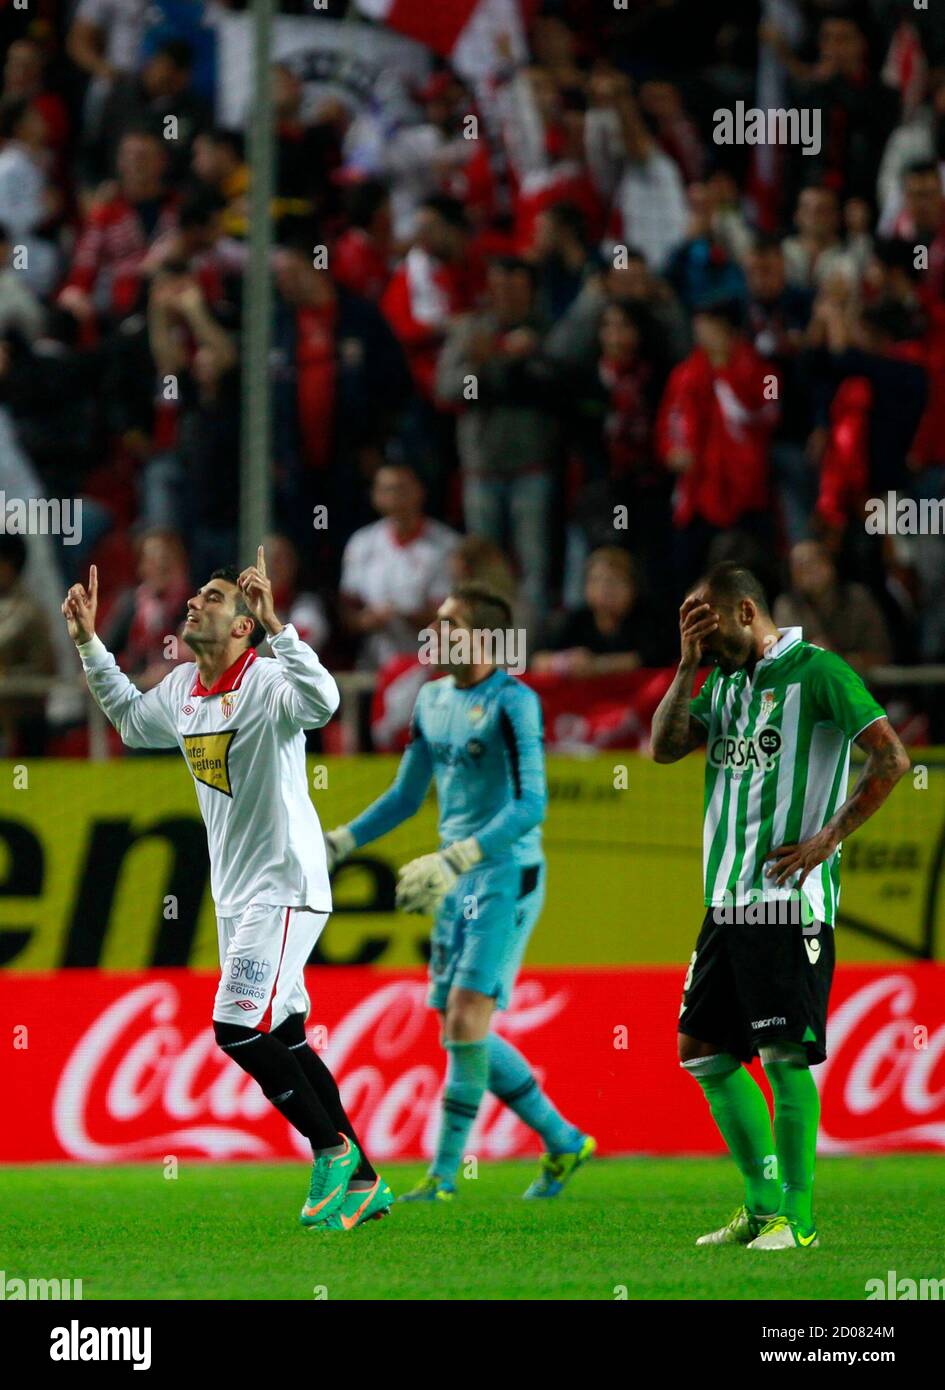 Sevilla's Jose Antonio Reyes (L) celebrates after scoring against Real Betis  during their Spanish First Division soccer match at Ramon Sanchez Pizjuan  stadium in Seville November 18, 2012. REUTERS/Marcelo del Pozo (SPAIN -